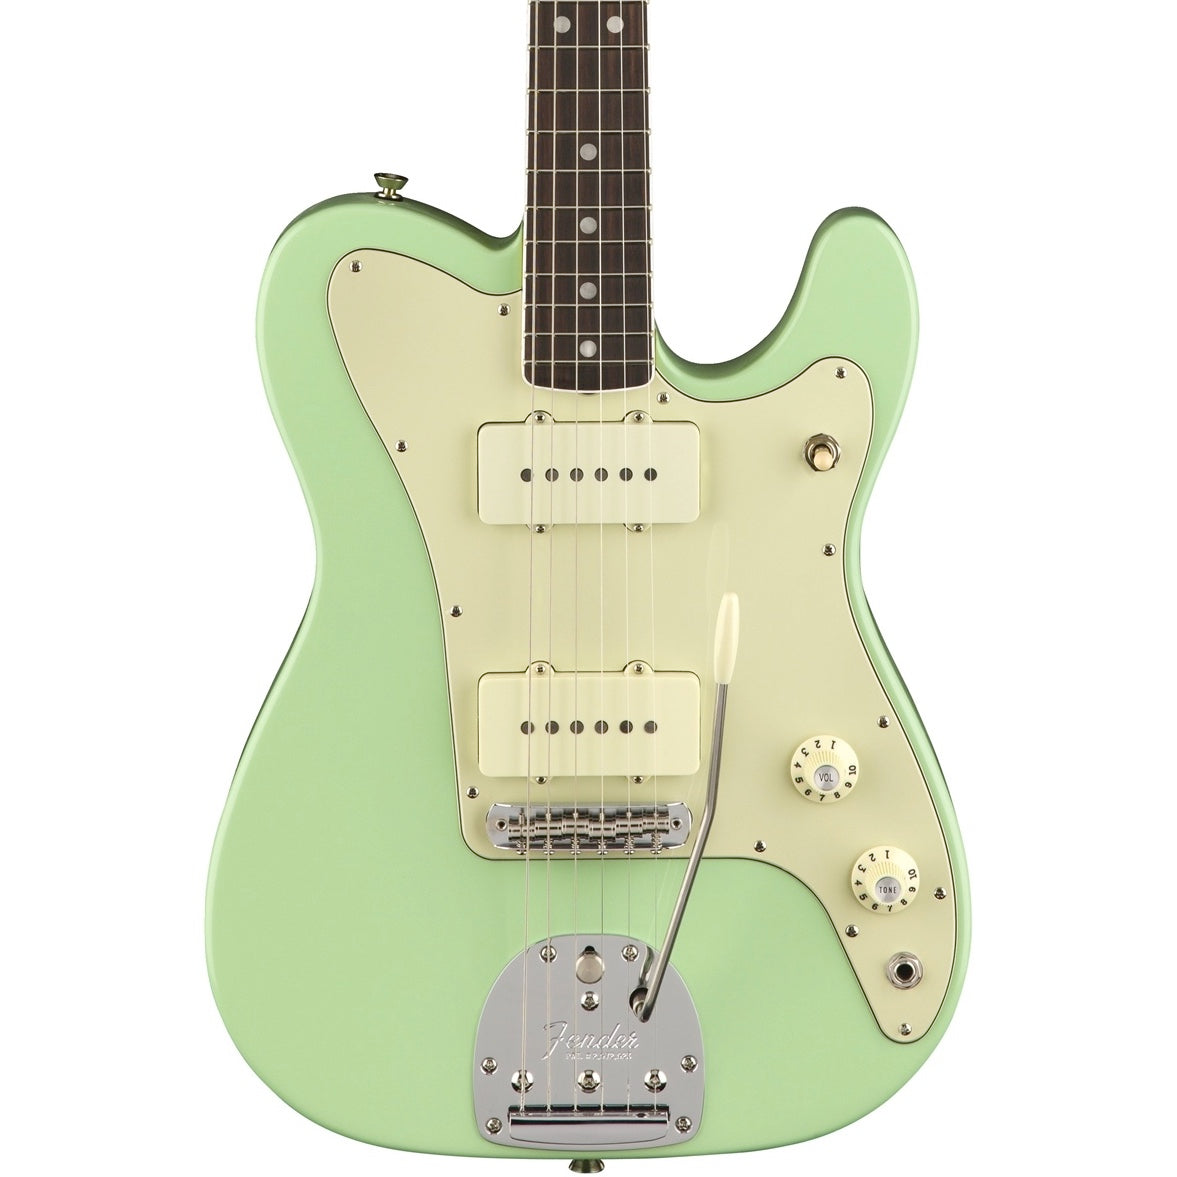 Fender 2018 Limited Edition Parallel Universe Jazz Tele Surf Green | Music Experience | Shop Online | South Africa